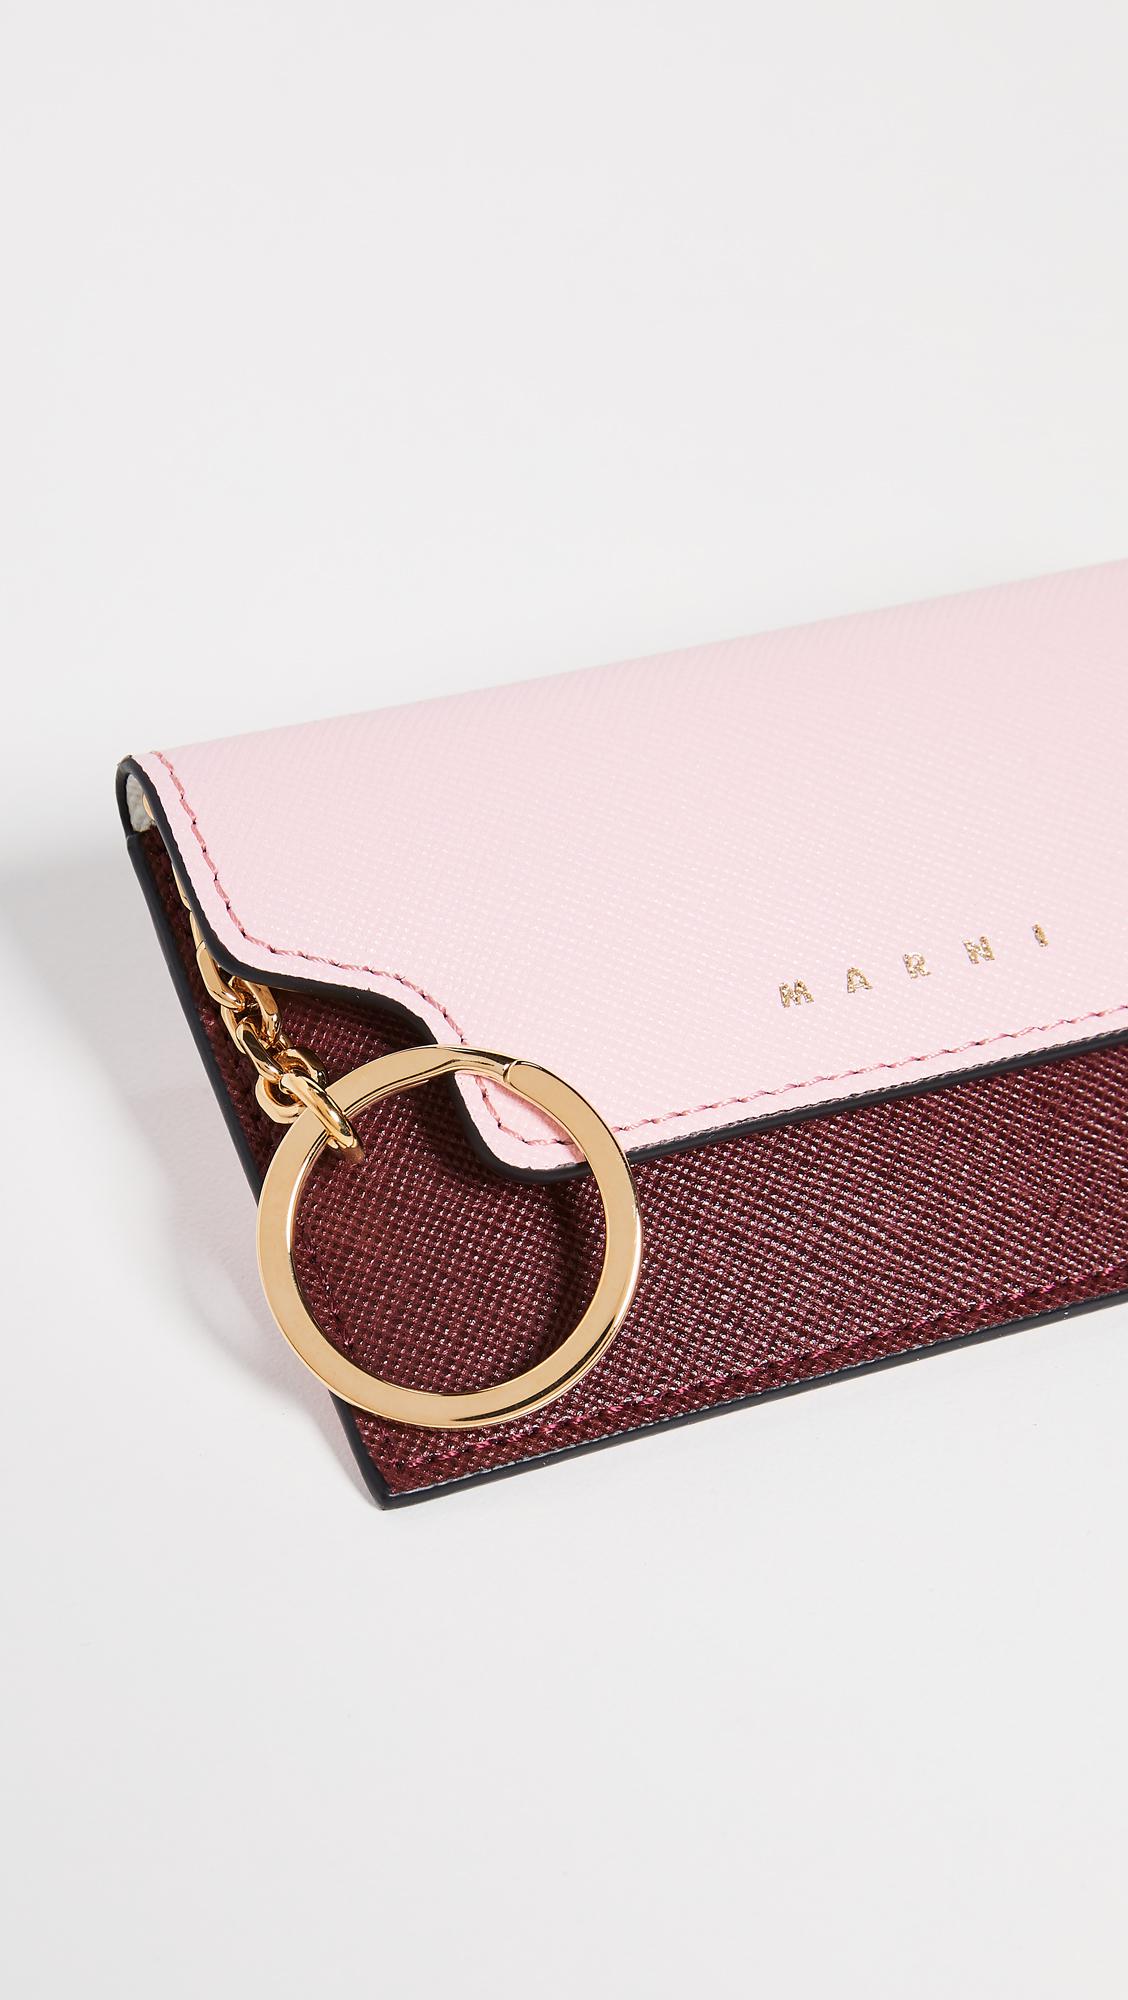 Marni Key Ring Card Case in Pink | Lyst